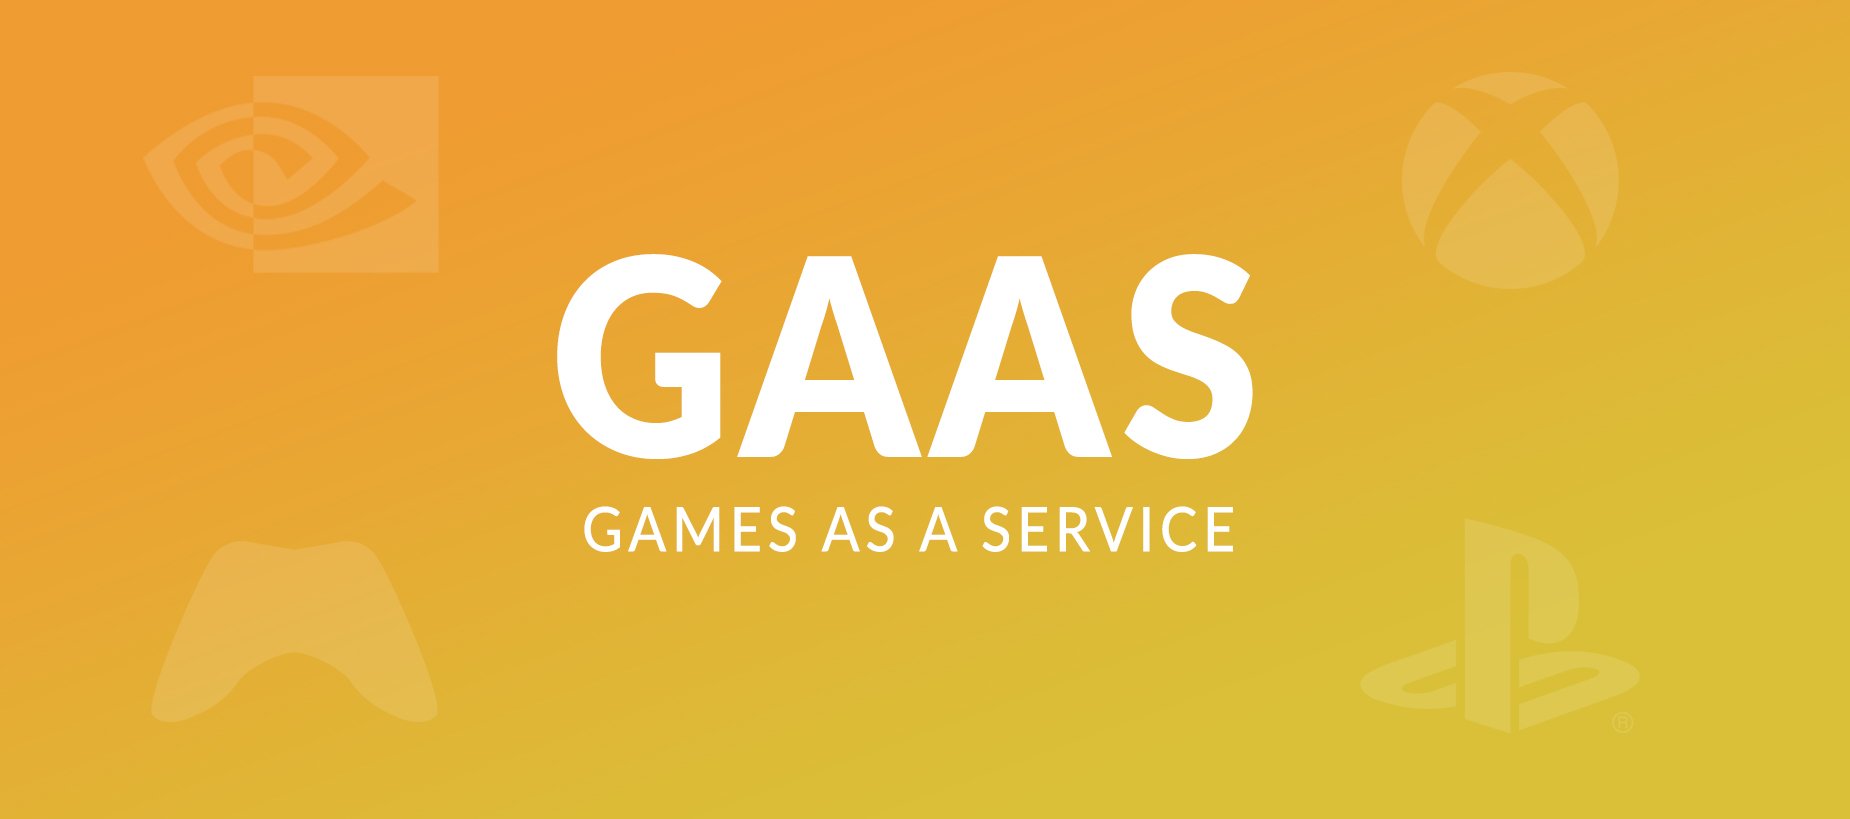 Game as a Service Model to create and develop a video game